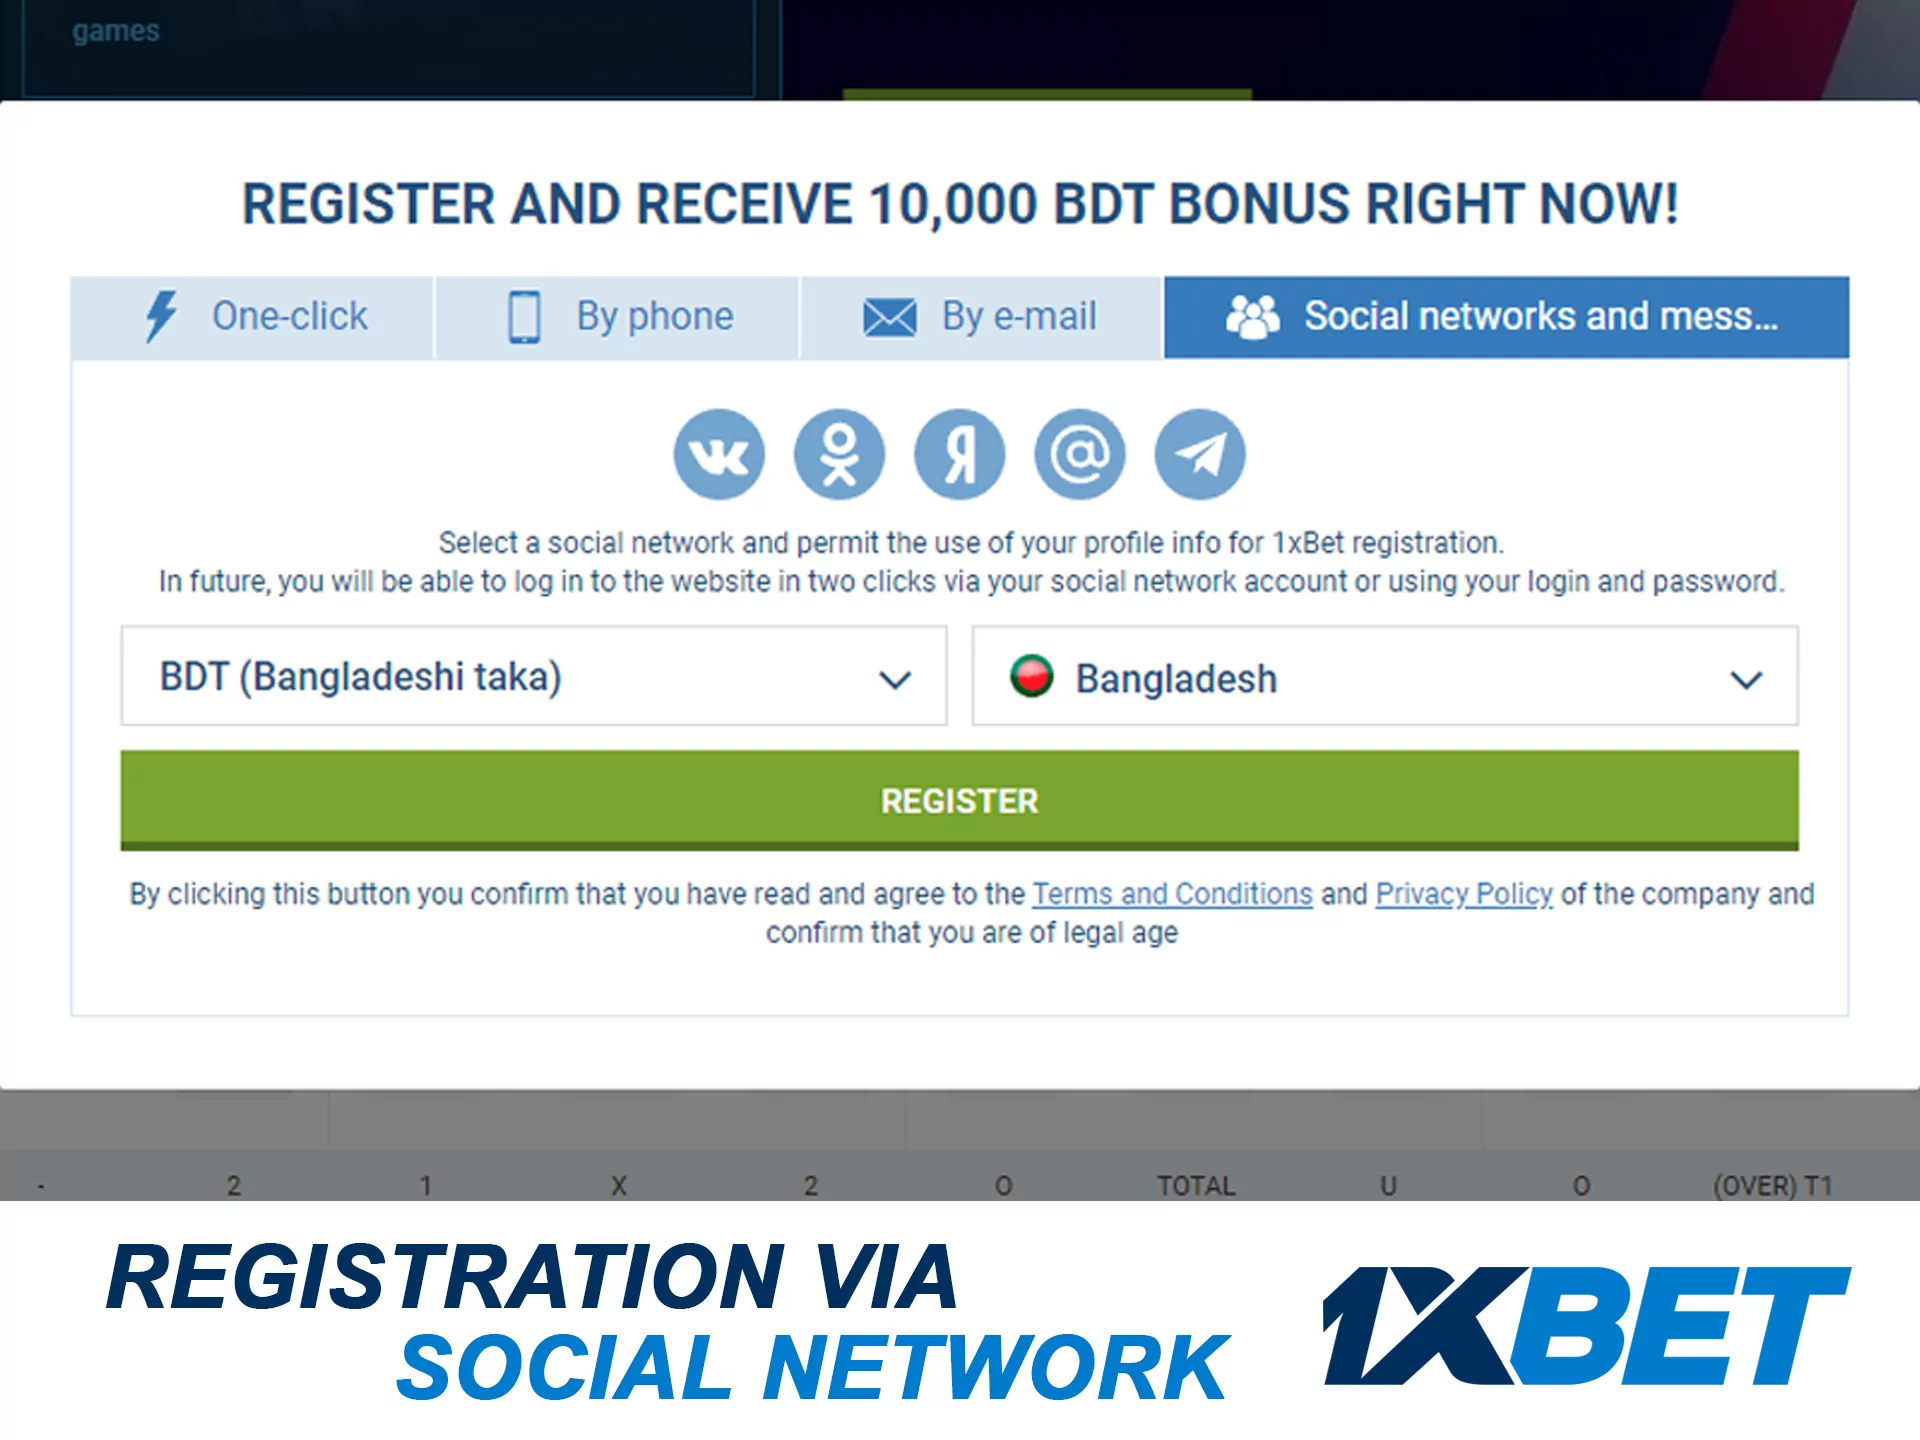 Use social networks for quick registration at 1xbet.